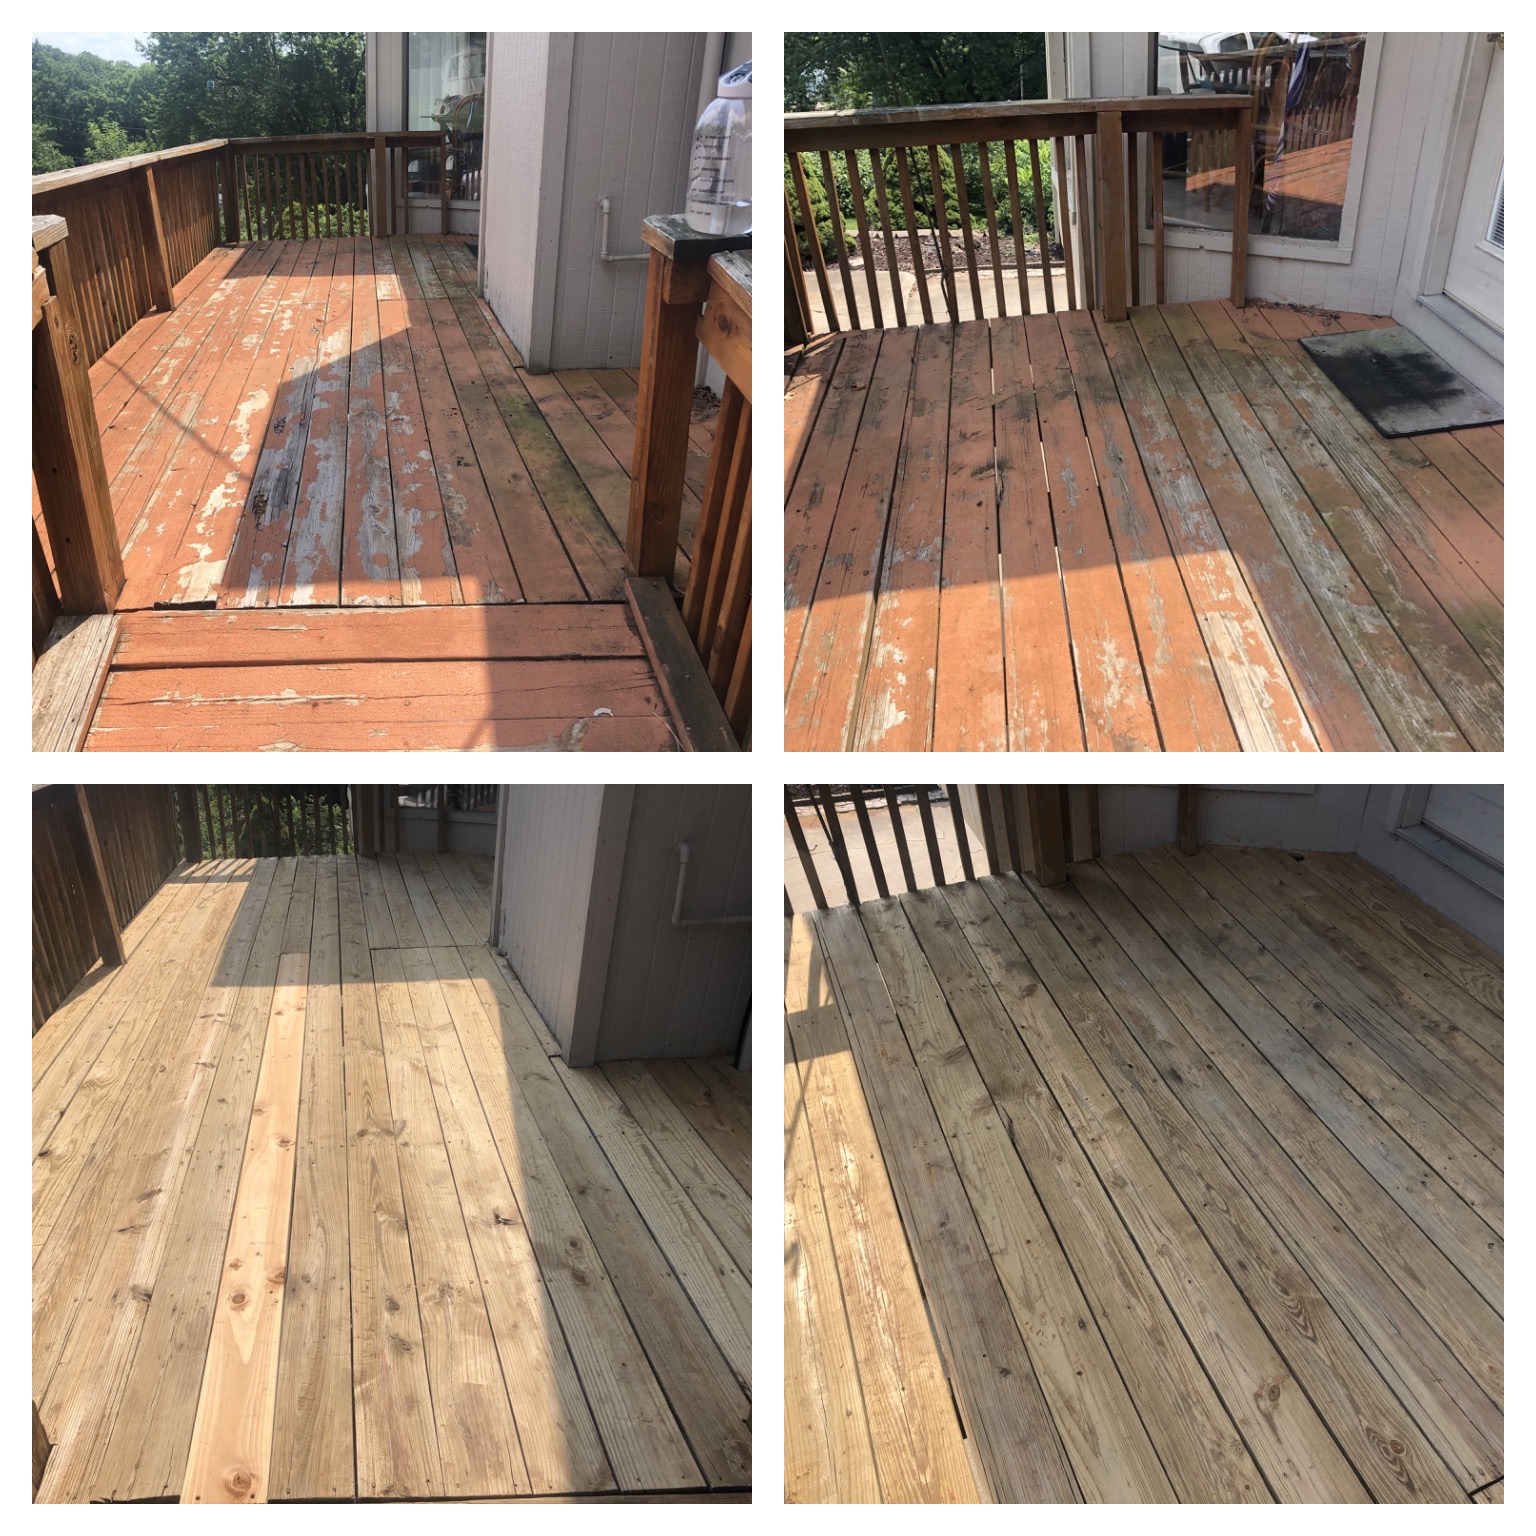 Professional Deck Washing in Rogersville, MO